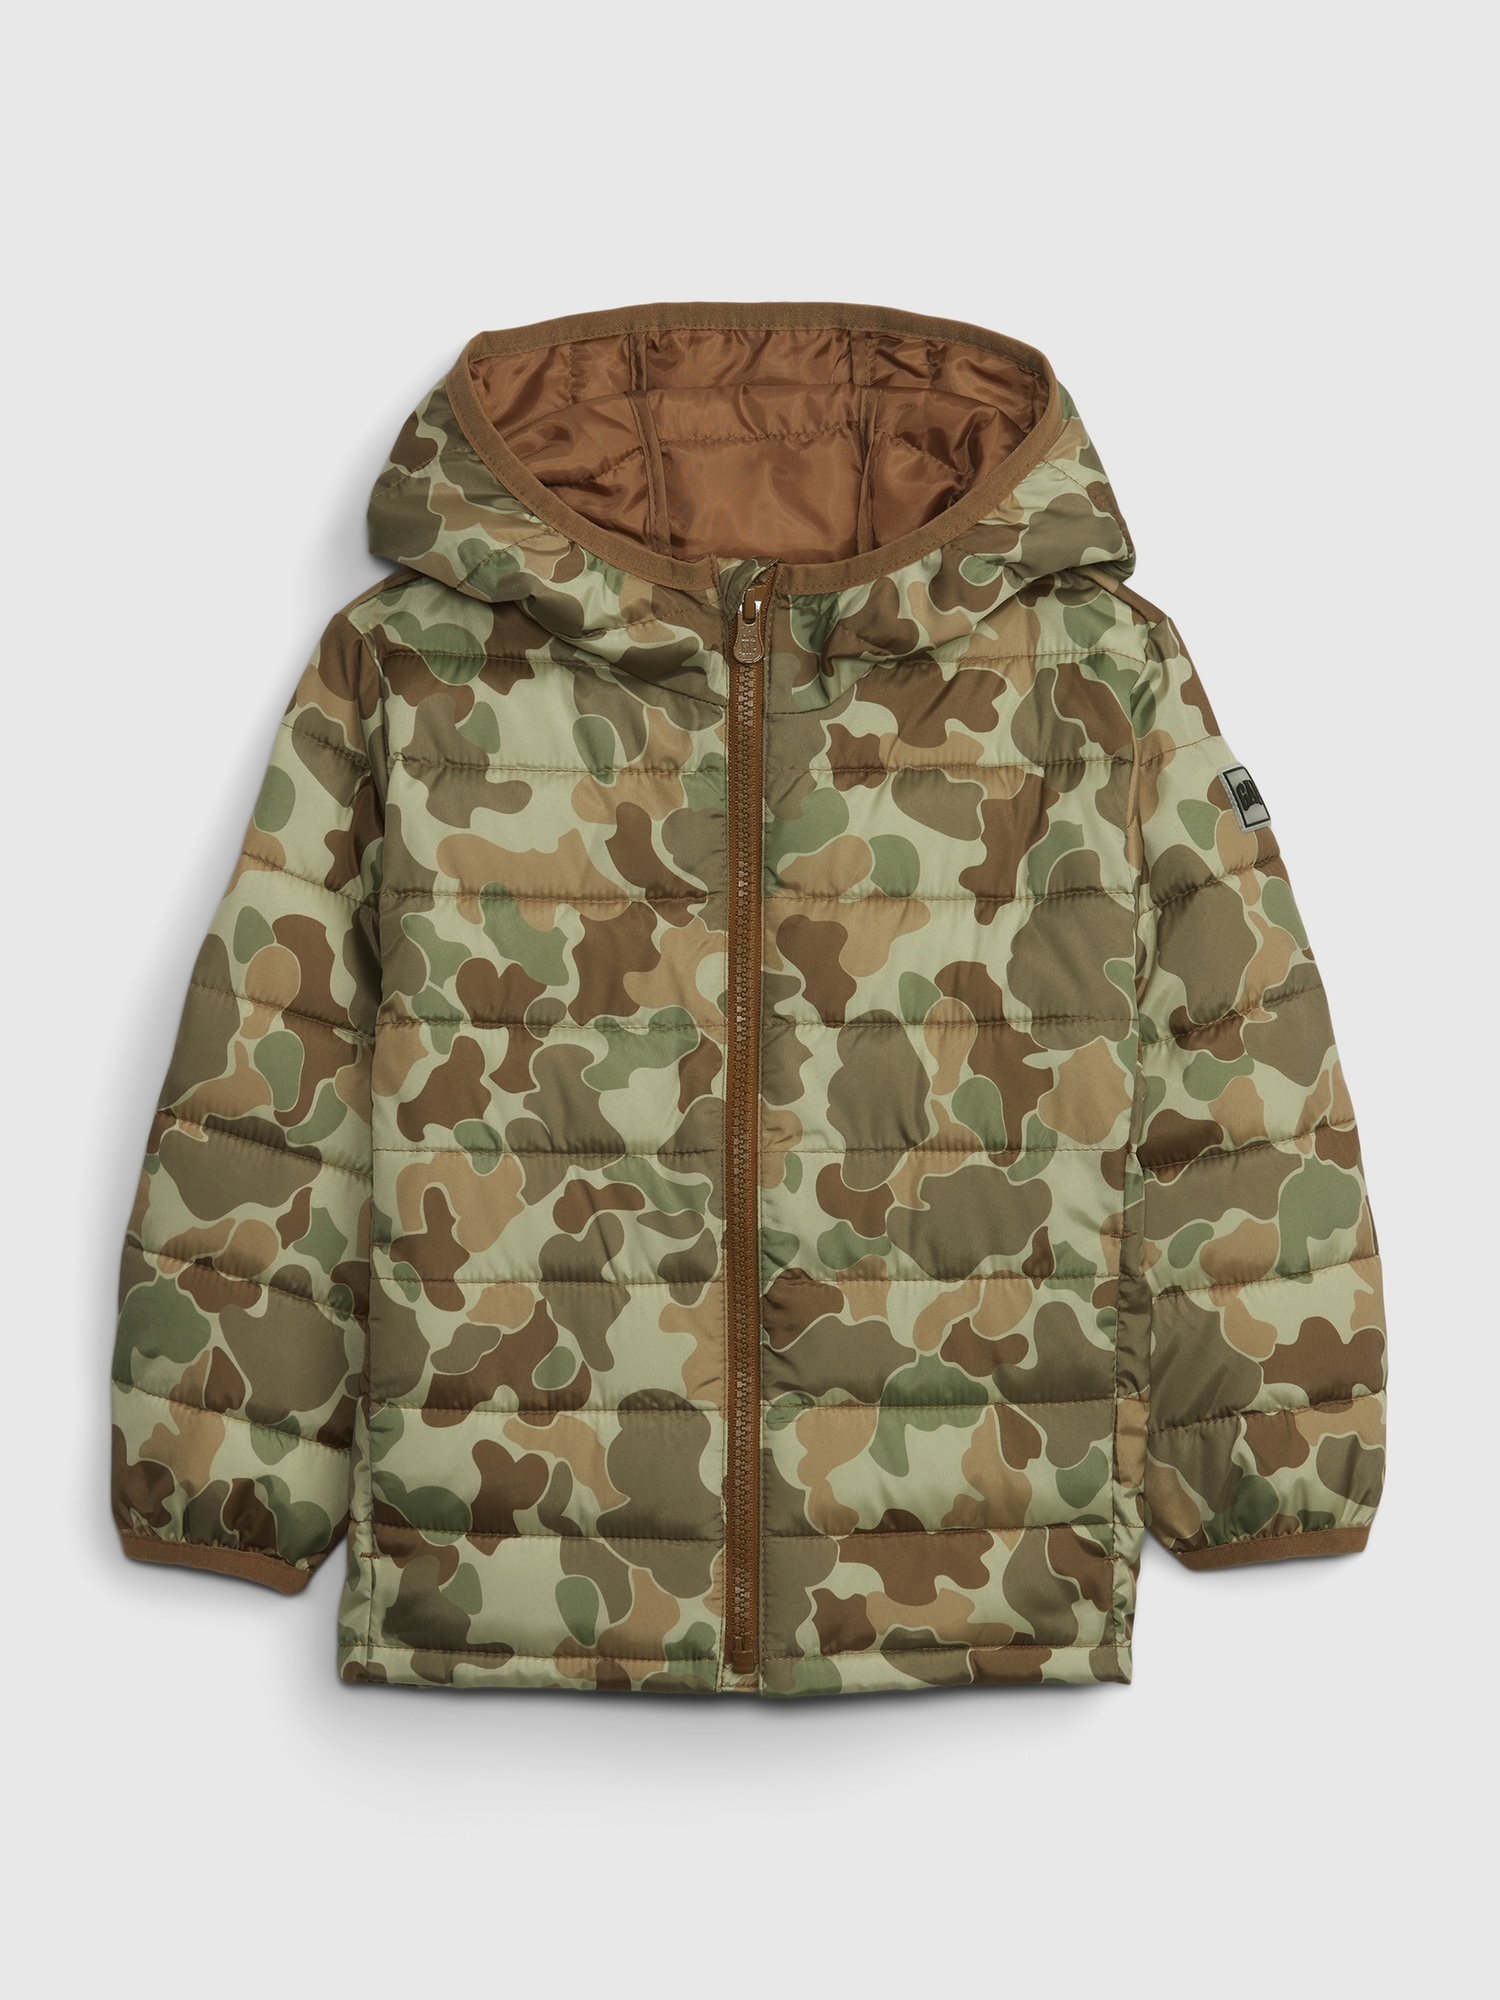 GAP Kids' quilted hooded jacket - Boys